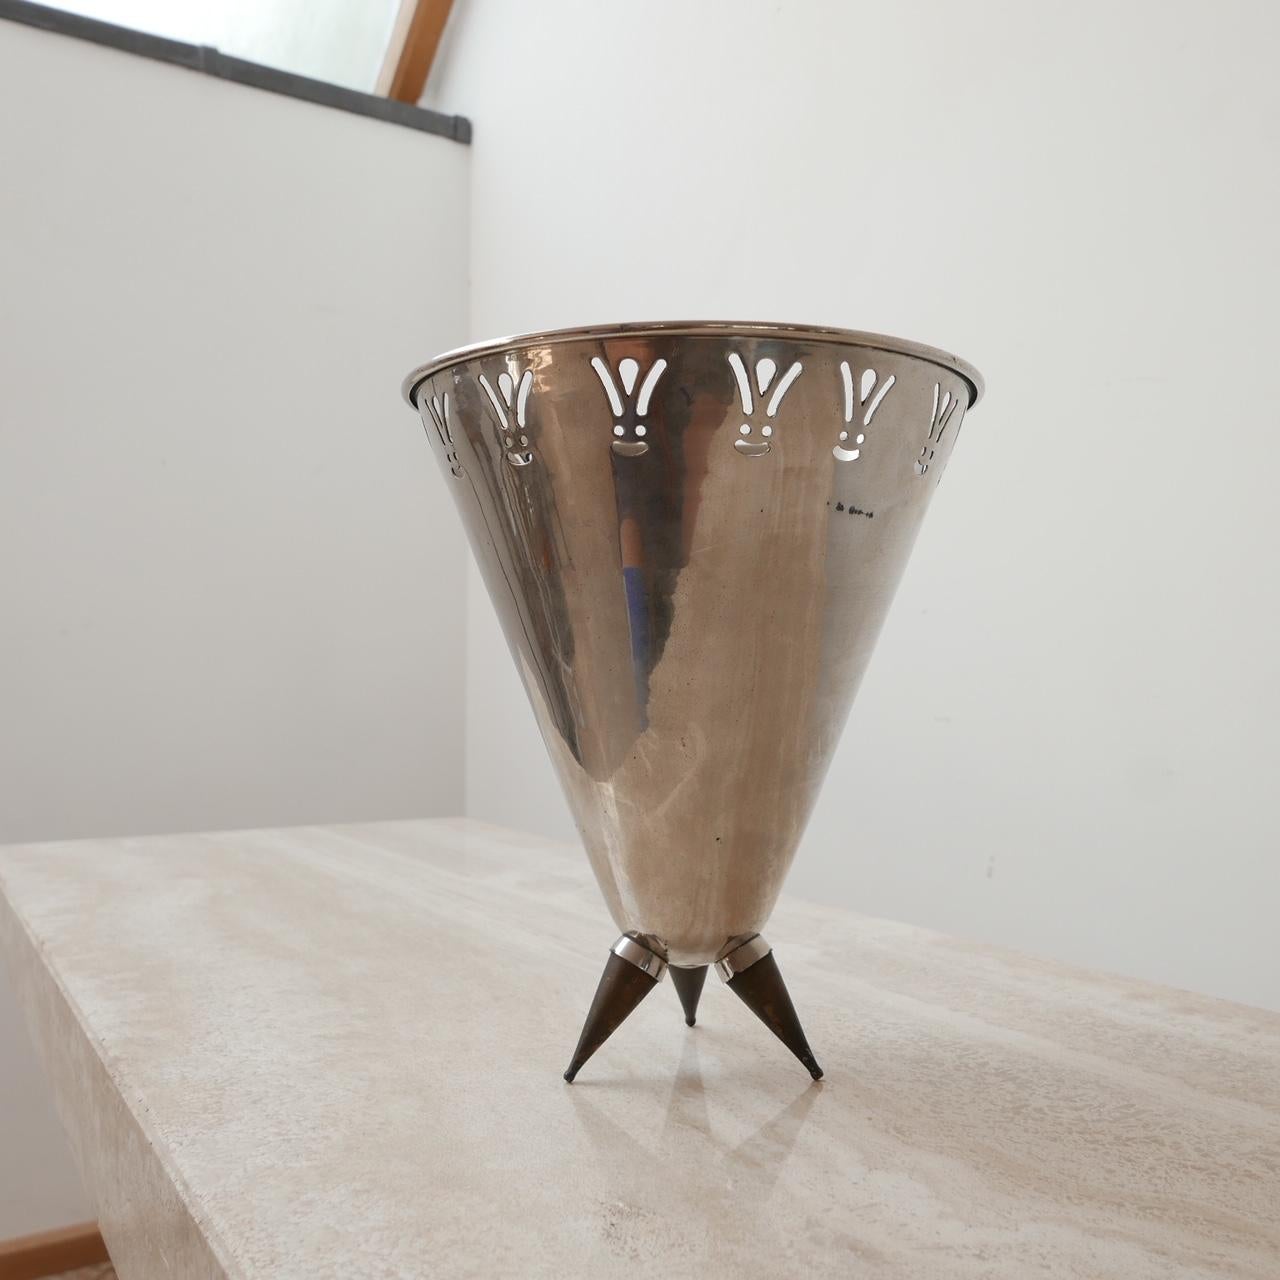 A well used champagne bucket attributed to design legend Philippe Starck. 

Patina and aging to the tripod brass legs,

France, c1990s. 

Good condition and perfectly usable. 

Dimensions: 24 diameter x 28 height in cm. 

Delivery: